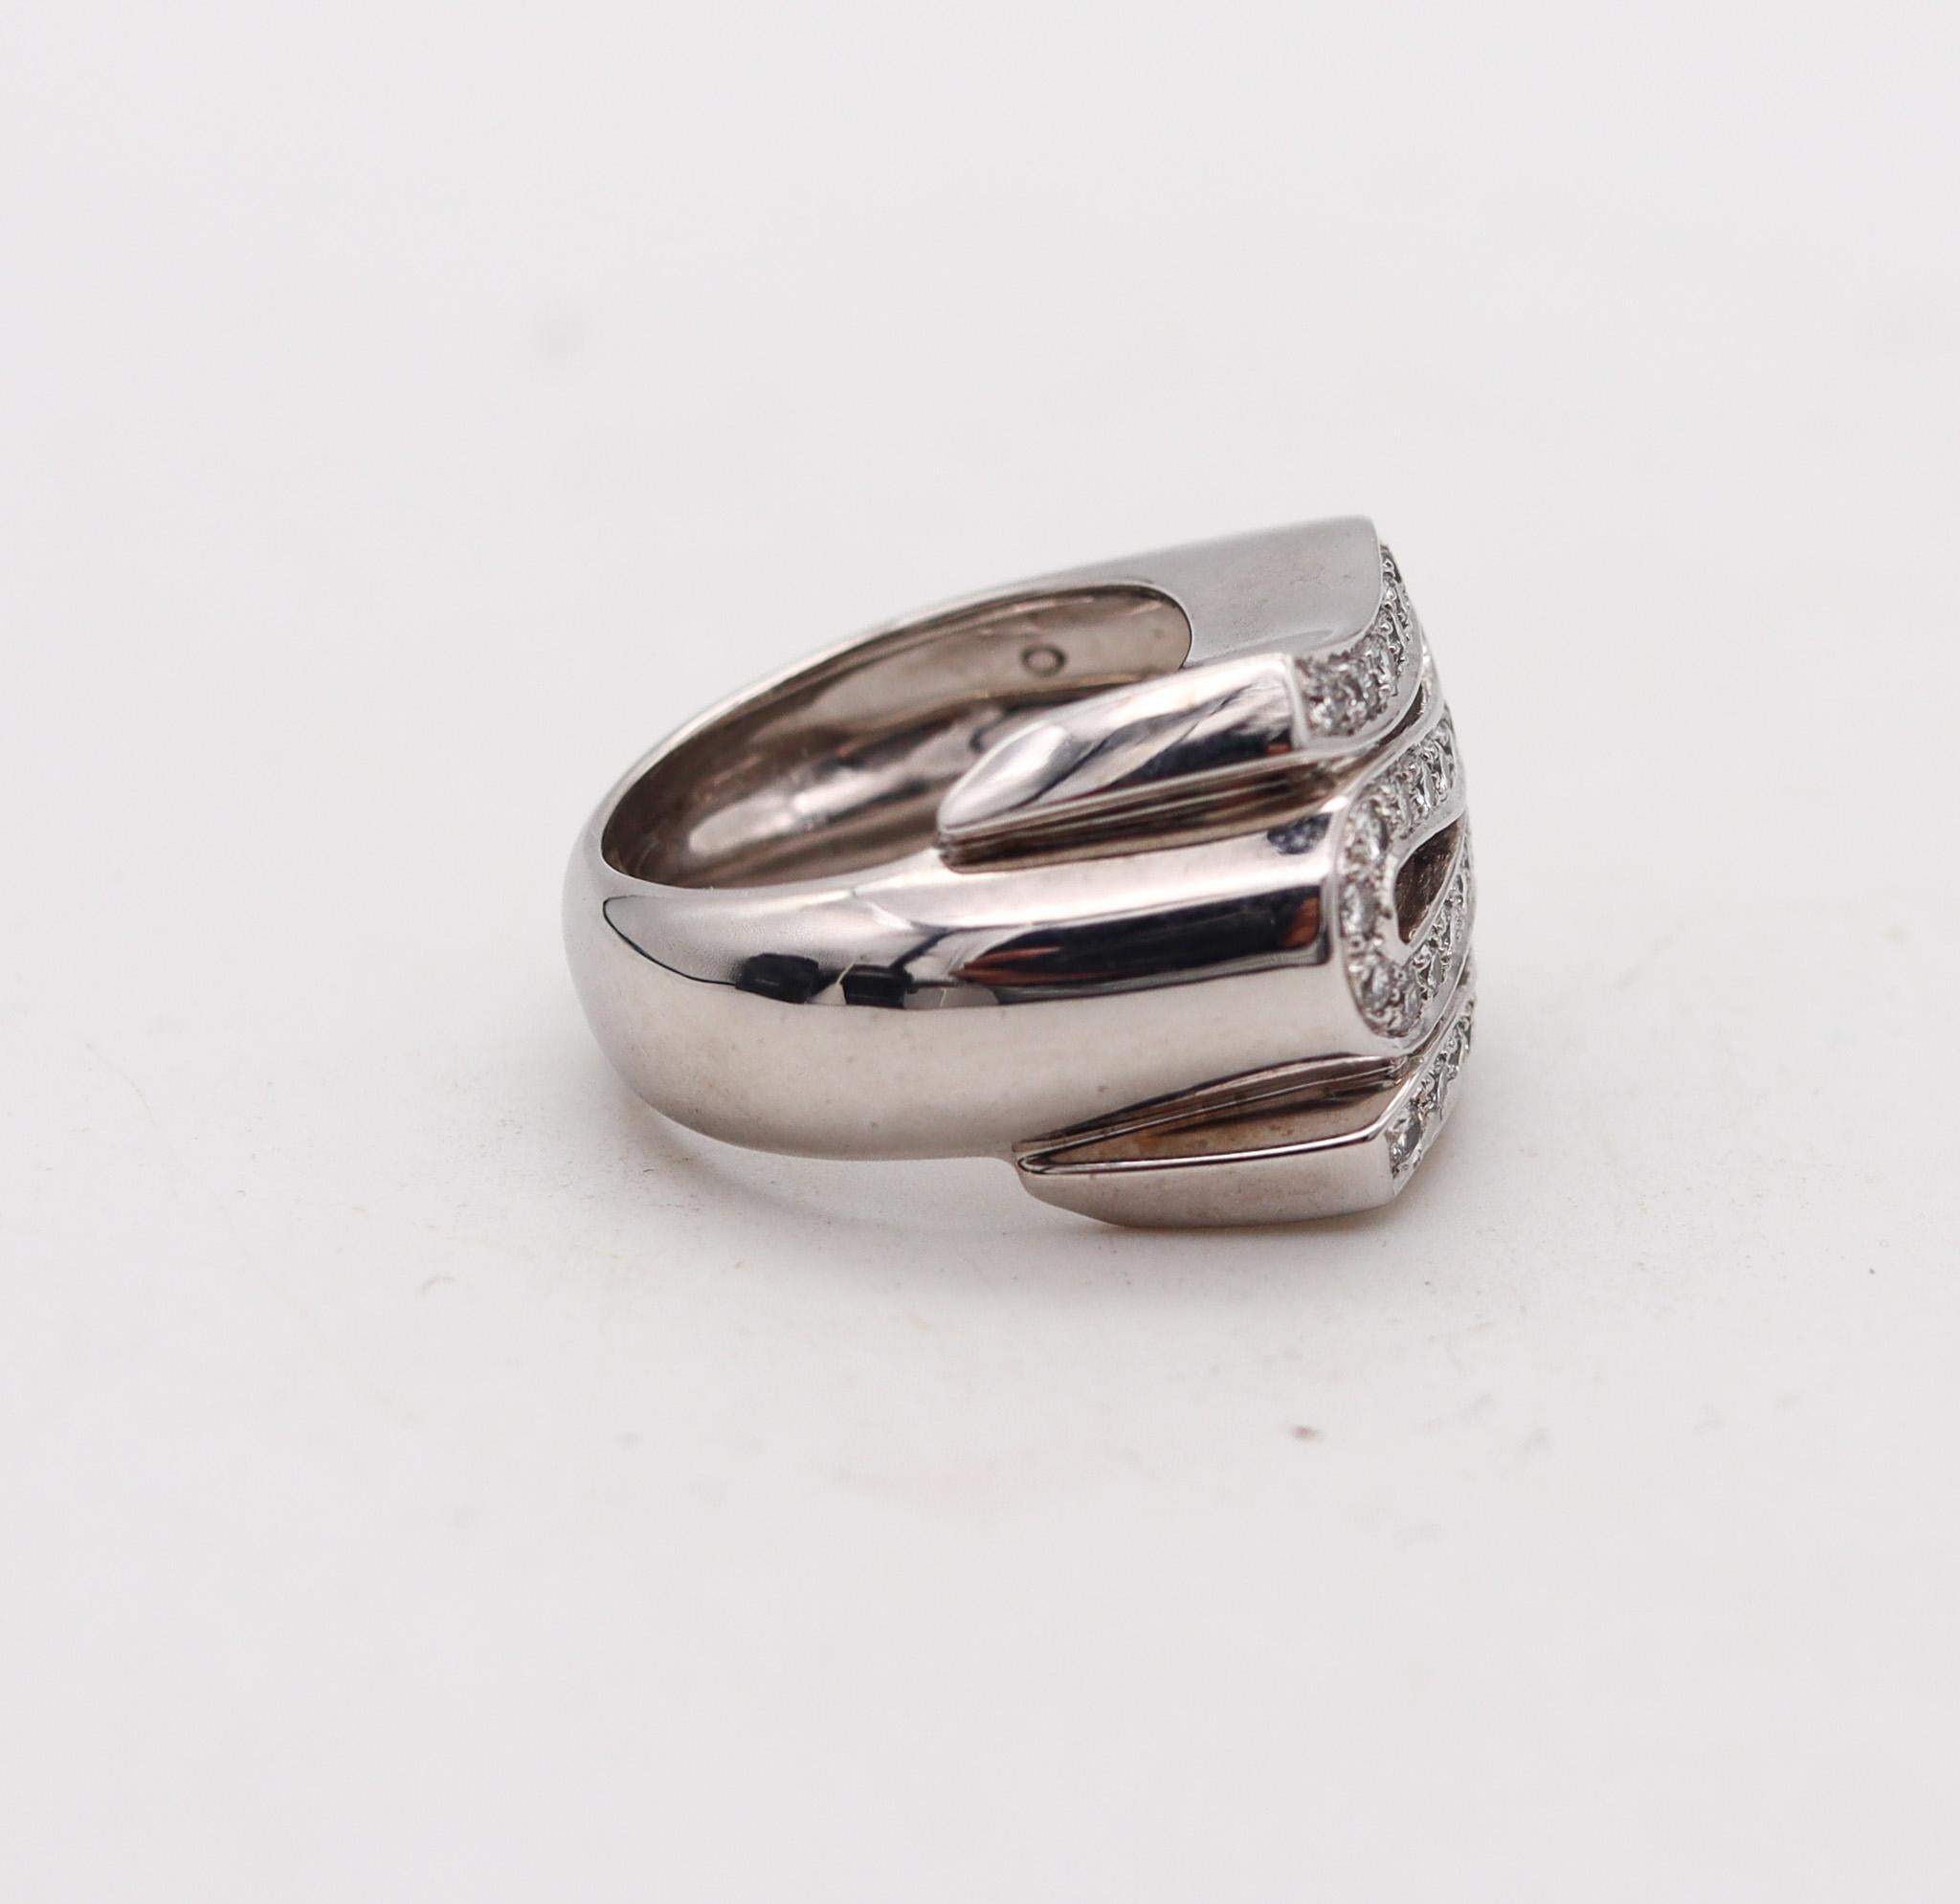 Gianni Versace 1990 Cocktail Ring In 18Kt White Gold With 1.03 Ctw In Diamonds In Excellent Condition For Sale In Miami, FL